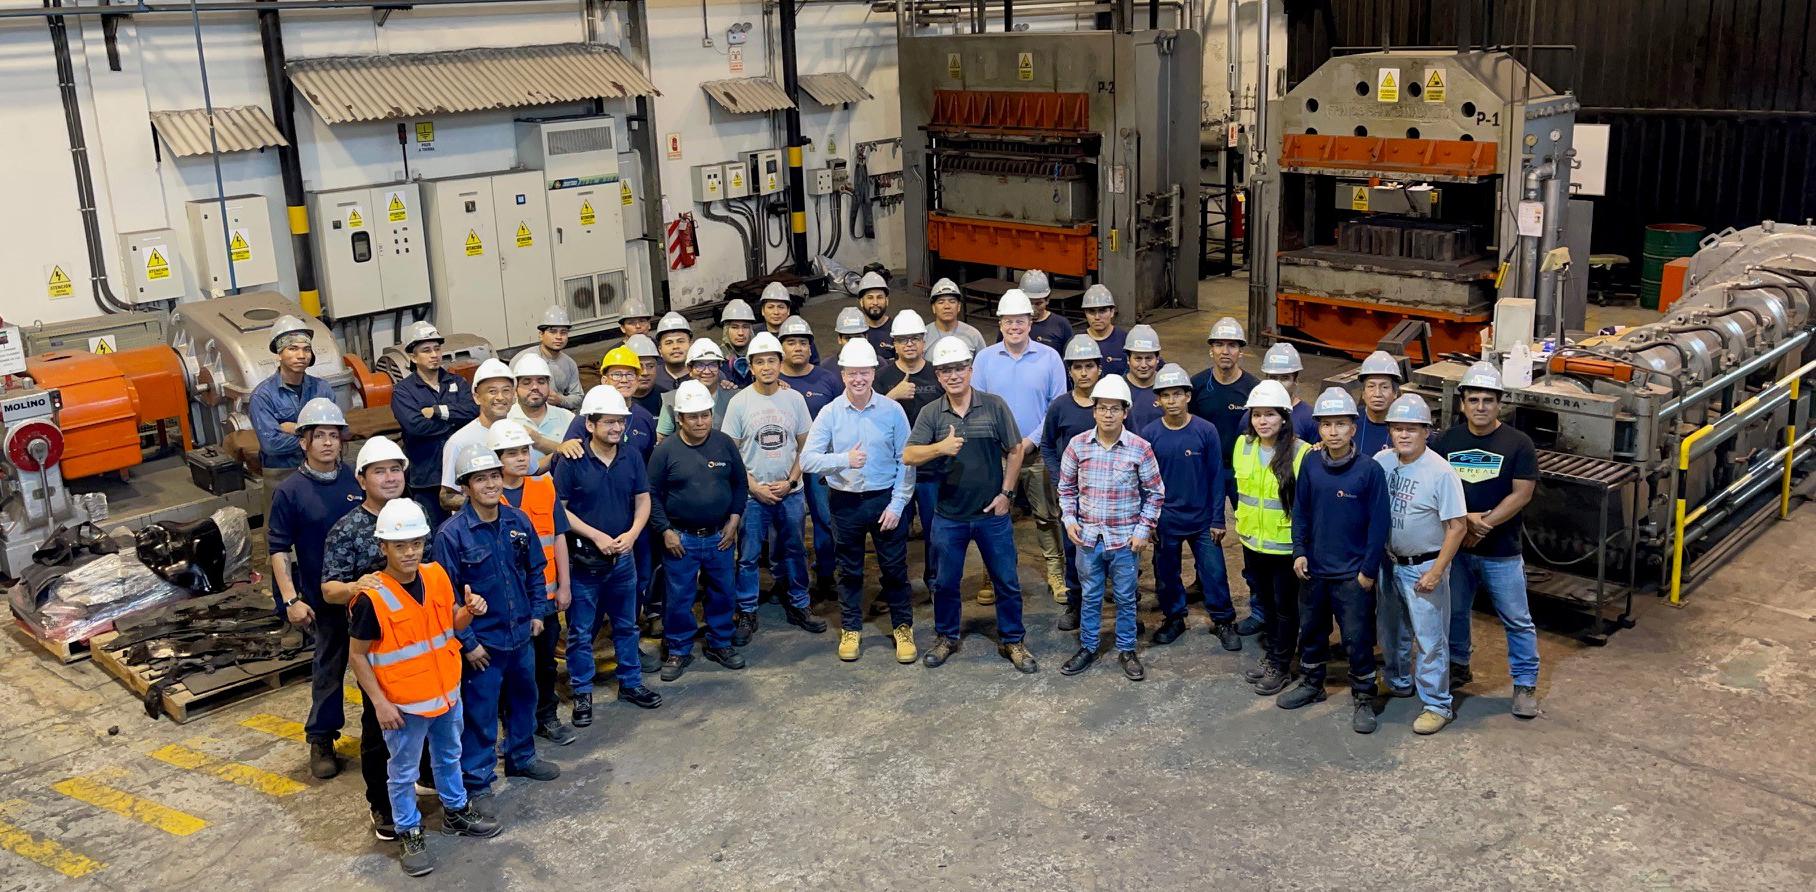 A team of factory employees stands together in a workshop. They are wearing white hardhats and some are giving the thumbs up hand gesture.